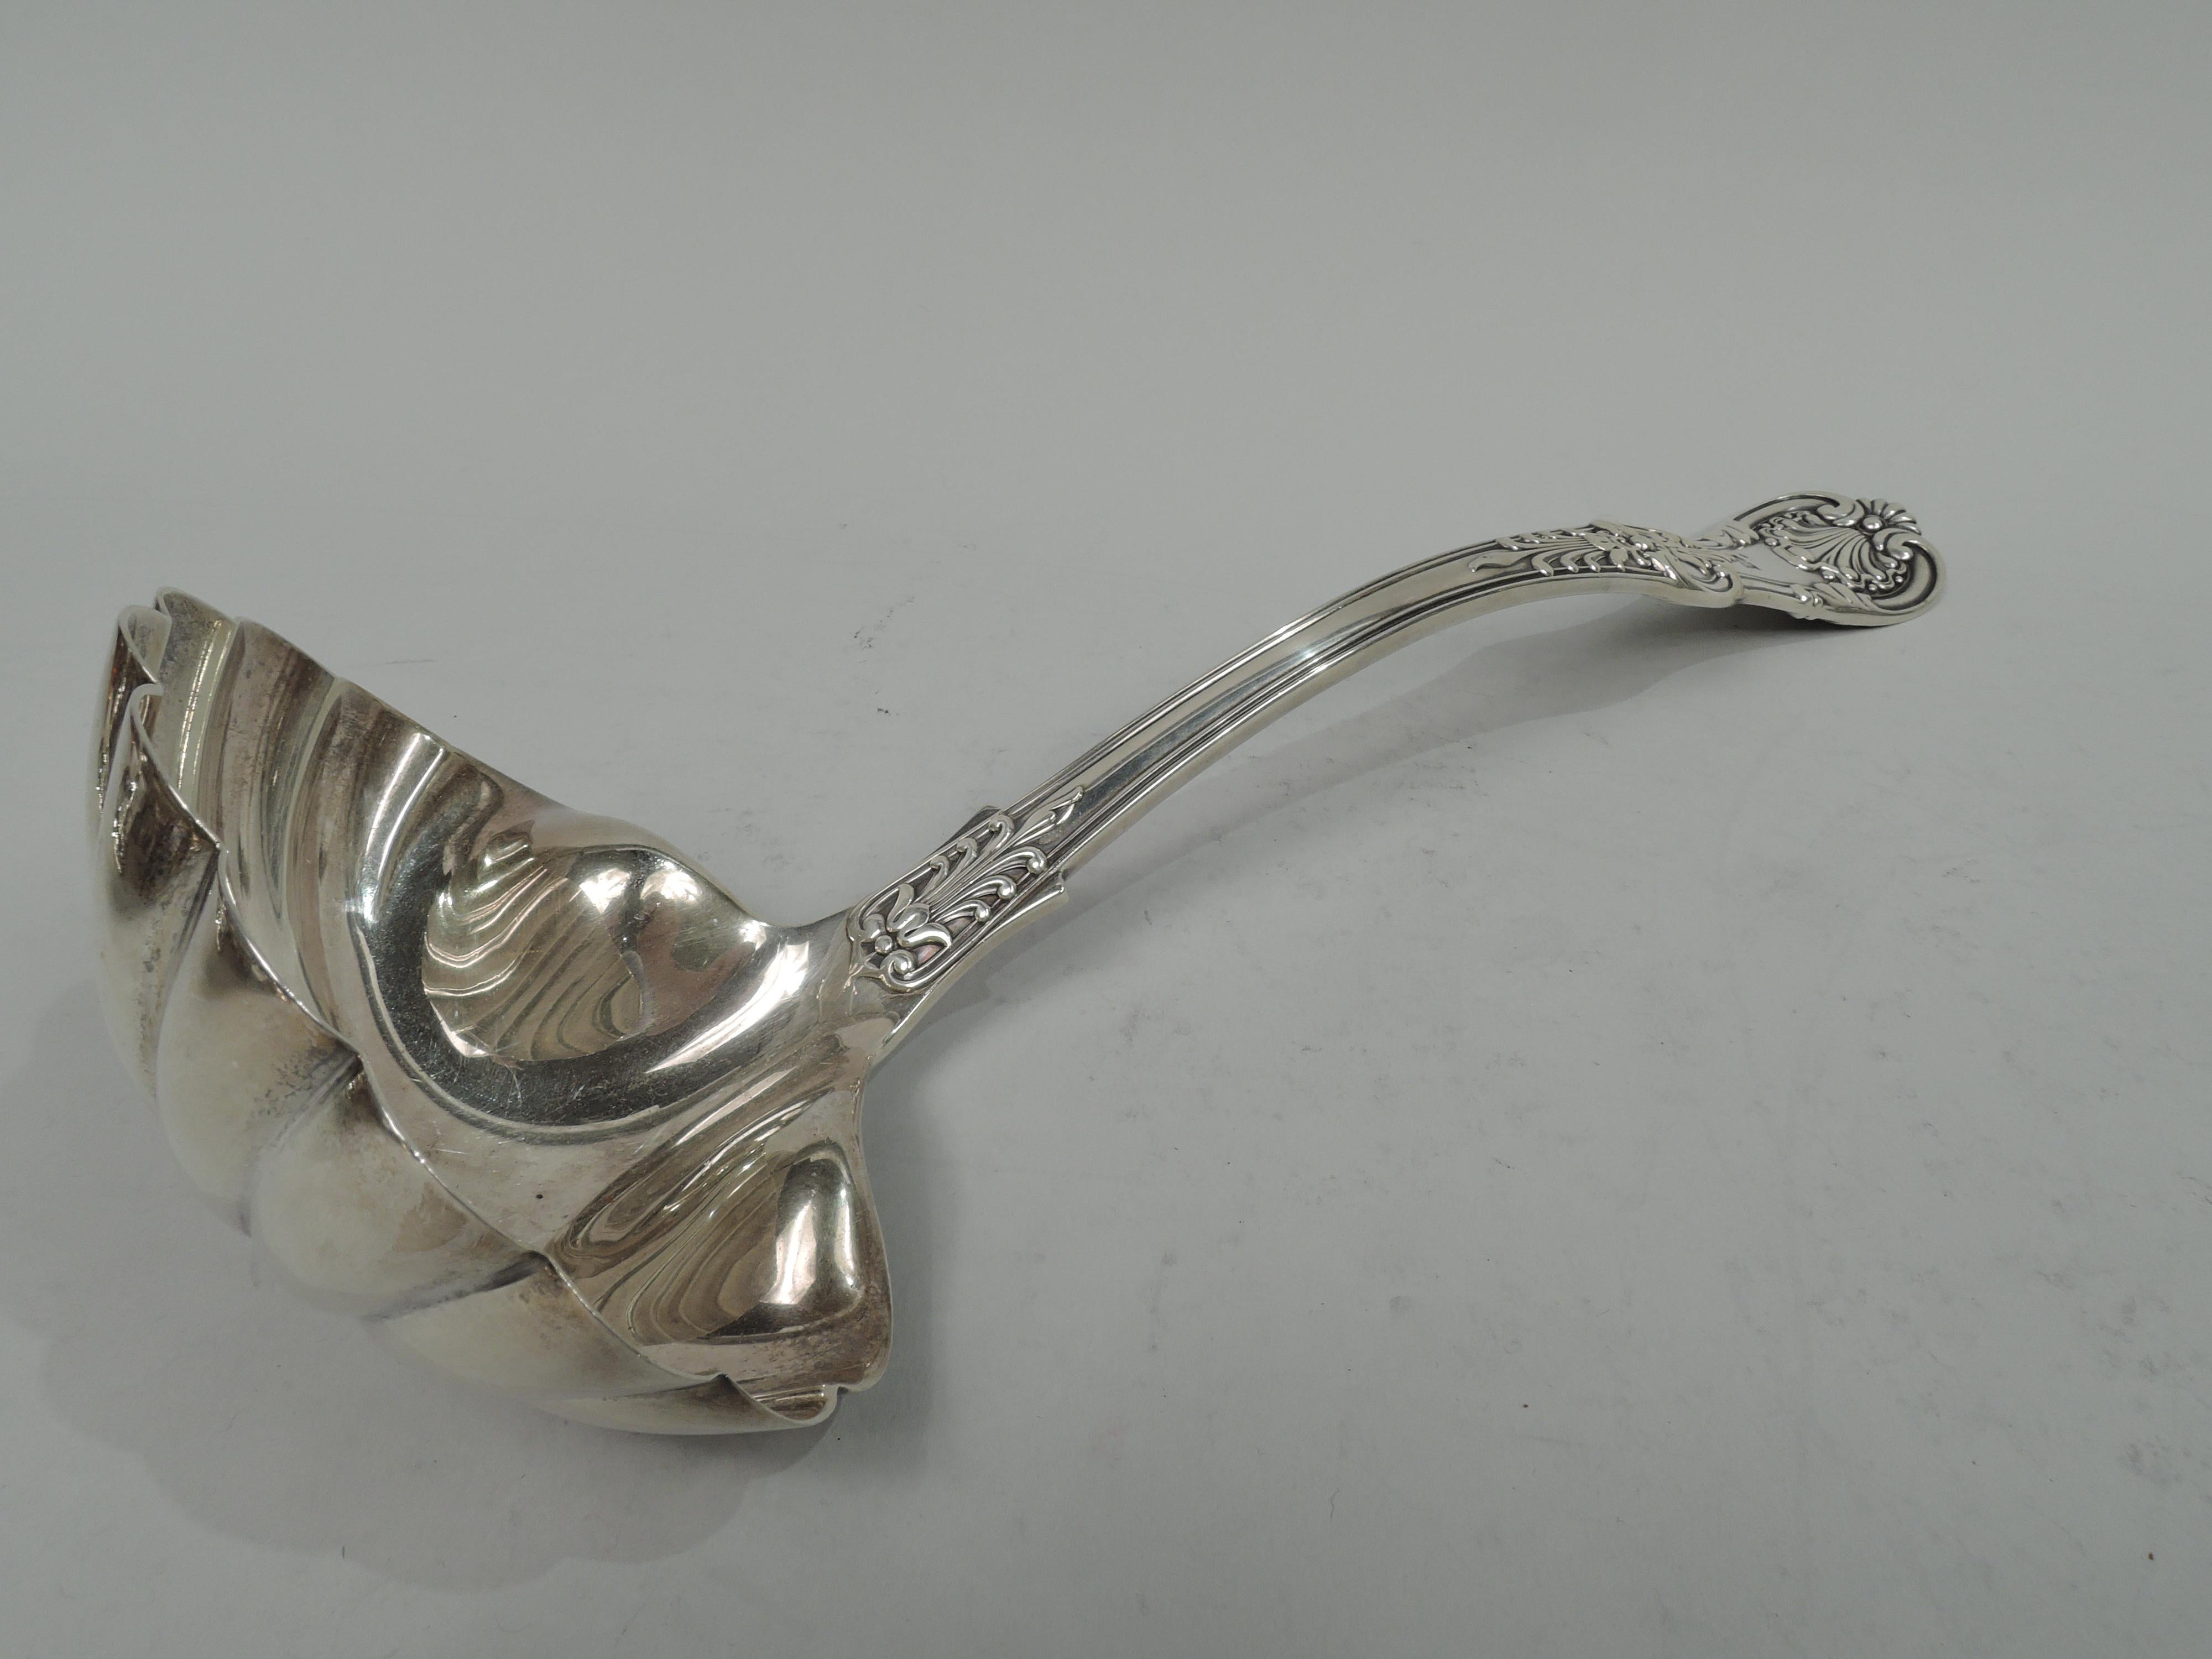 English King sterling silver soup ladle with scalloped bowl. Made by Tiffany & Co. in New York, ca 1920. A great piece in the historic Georgian pattern. Fully marked including maker’s stamp. Heavy weight: 11.5 troy ounces.